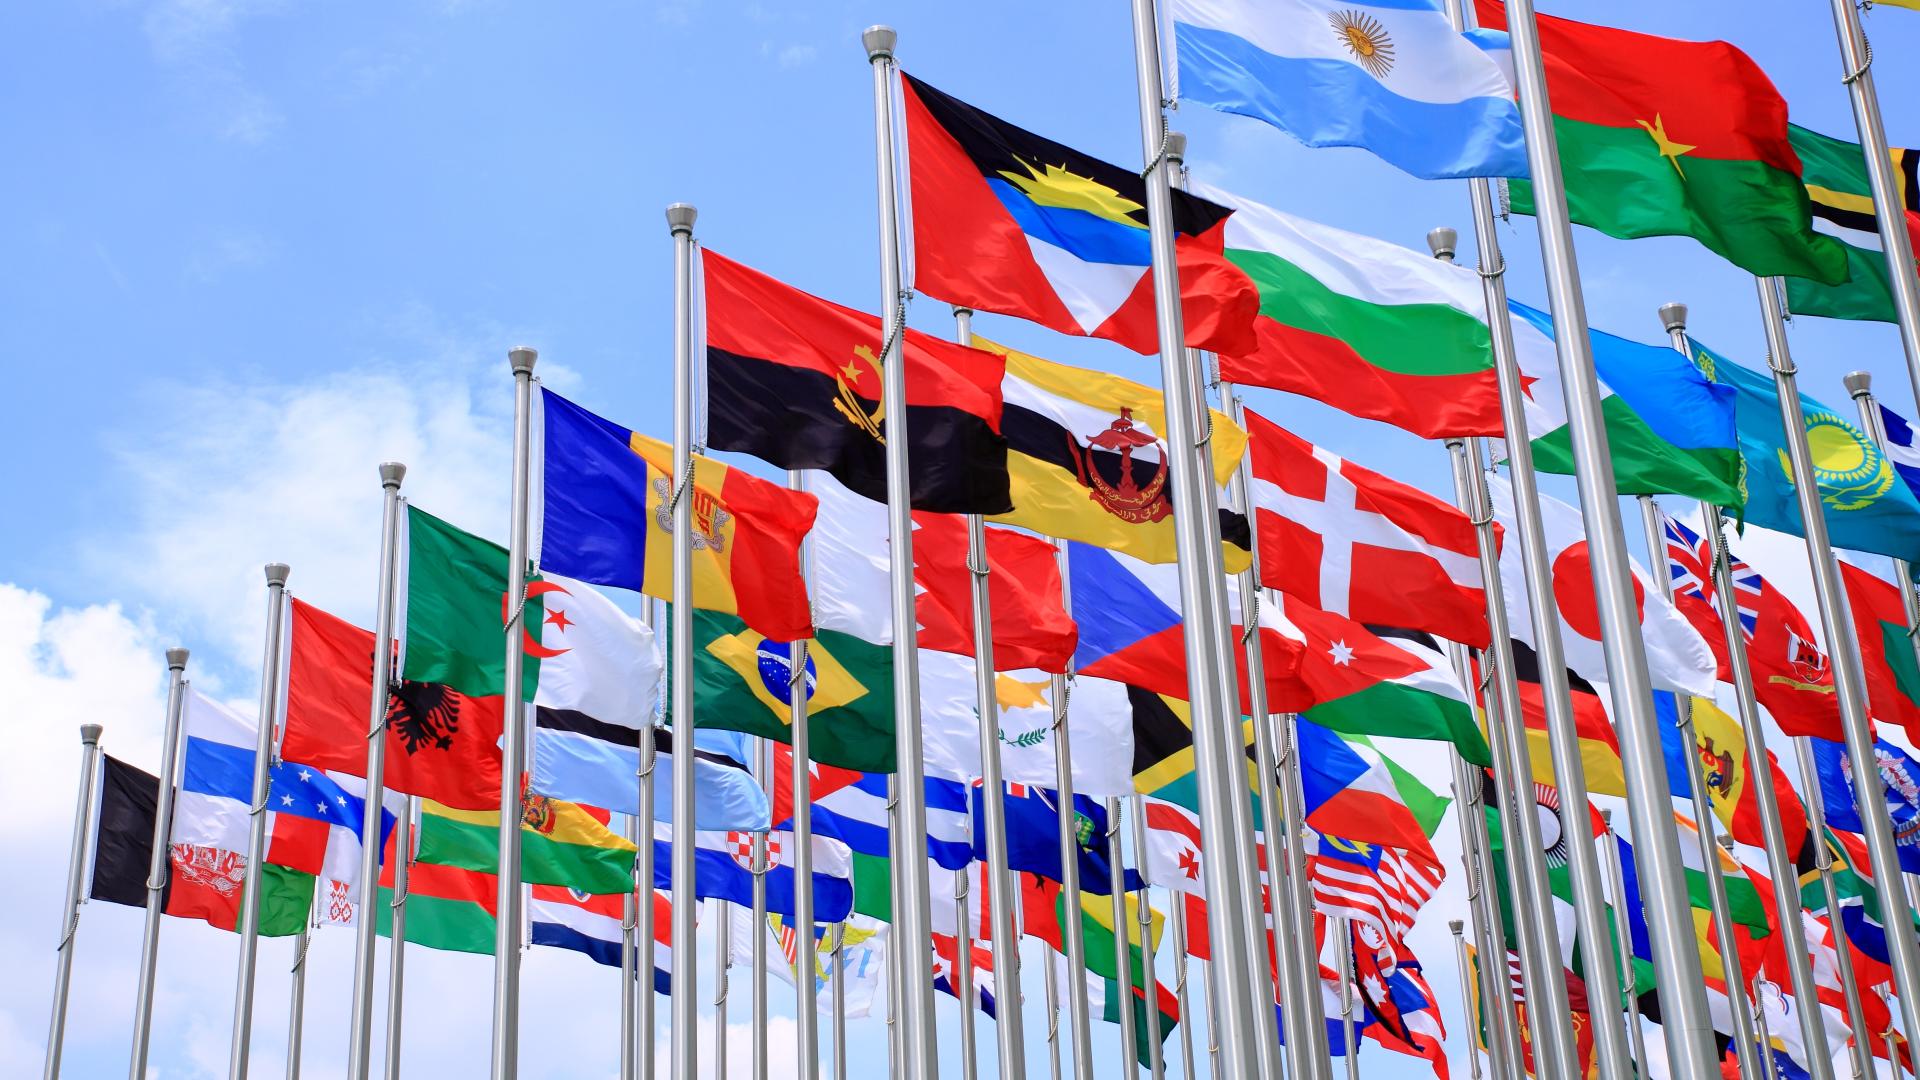 flags from around the world on flagpoles